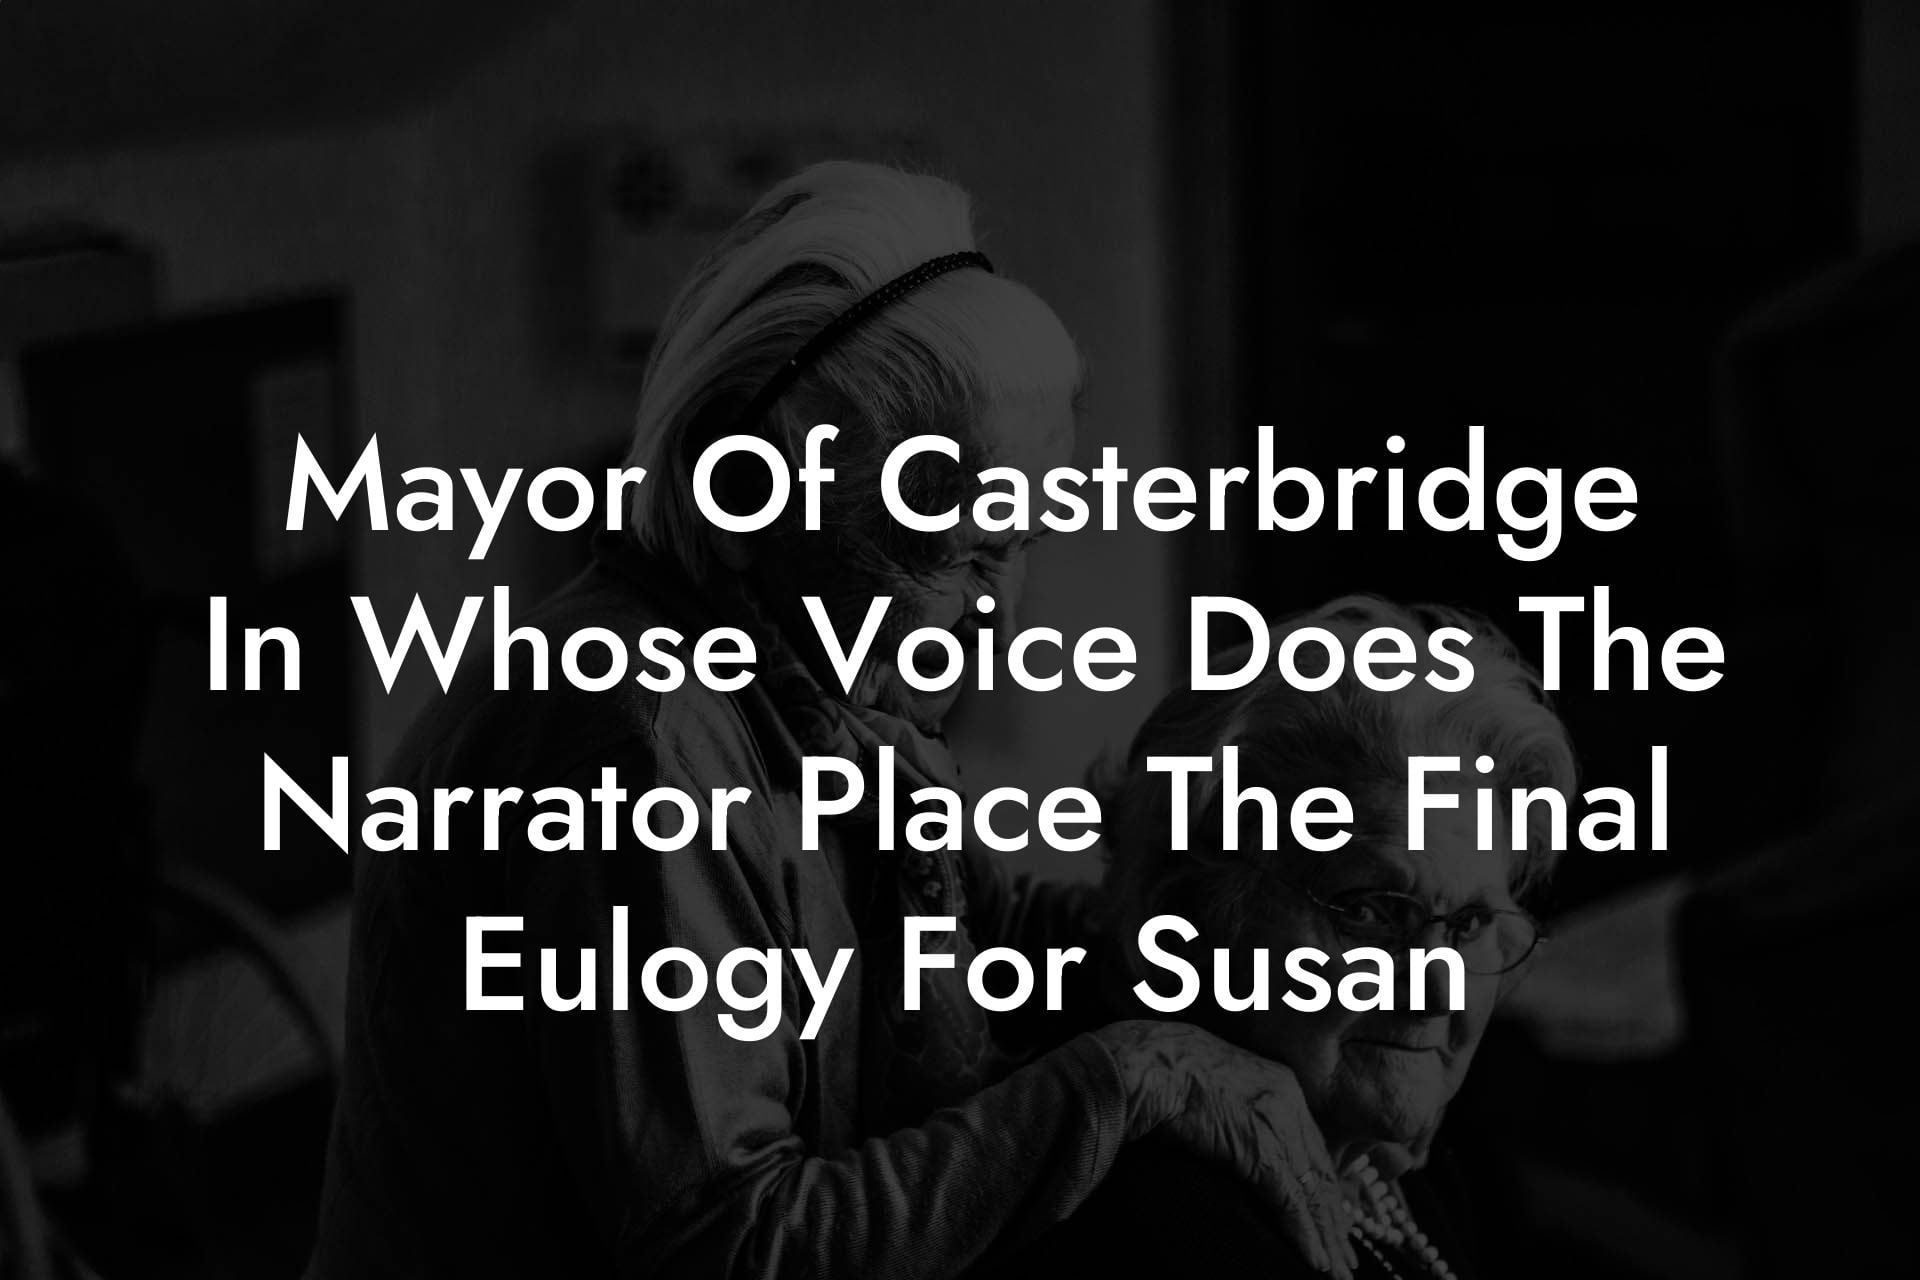 Mayor Of Casterbridge In Whose Voice Does The Narrator Place The Final Eulogy For Susan